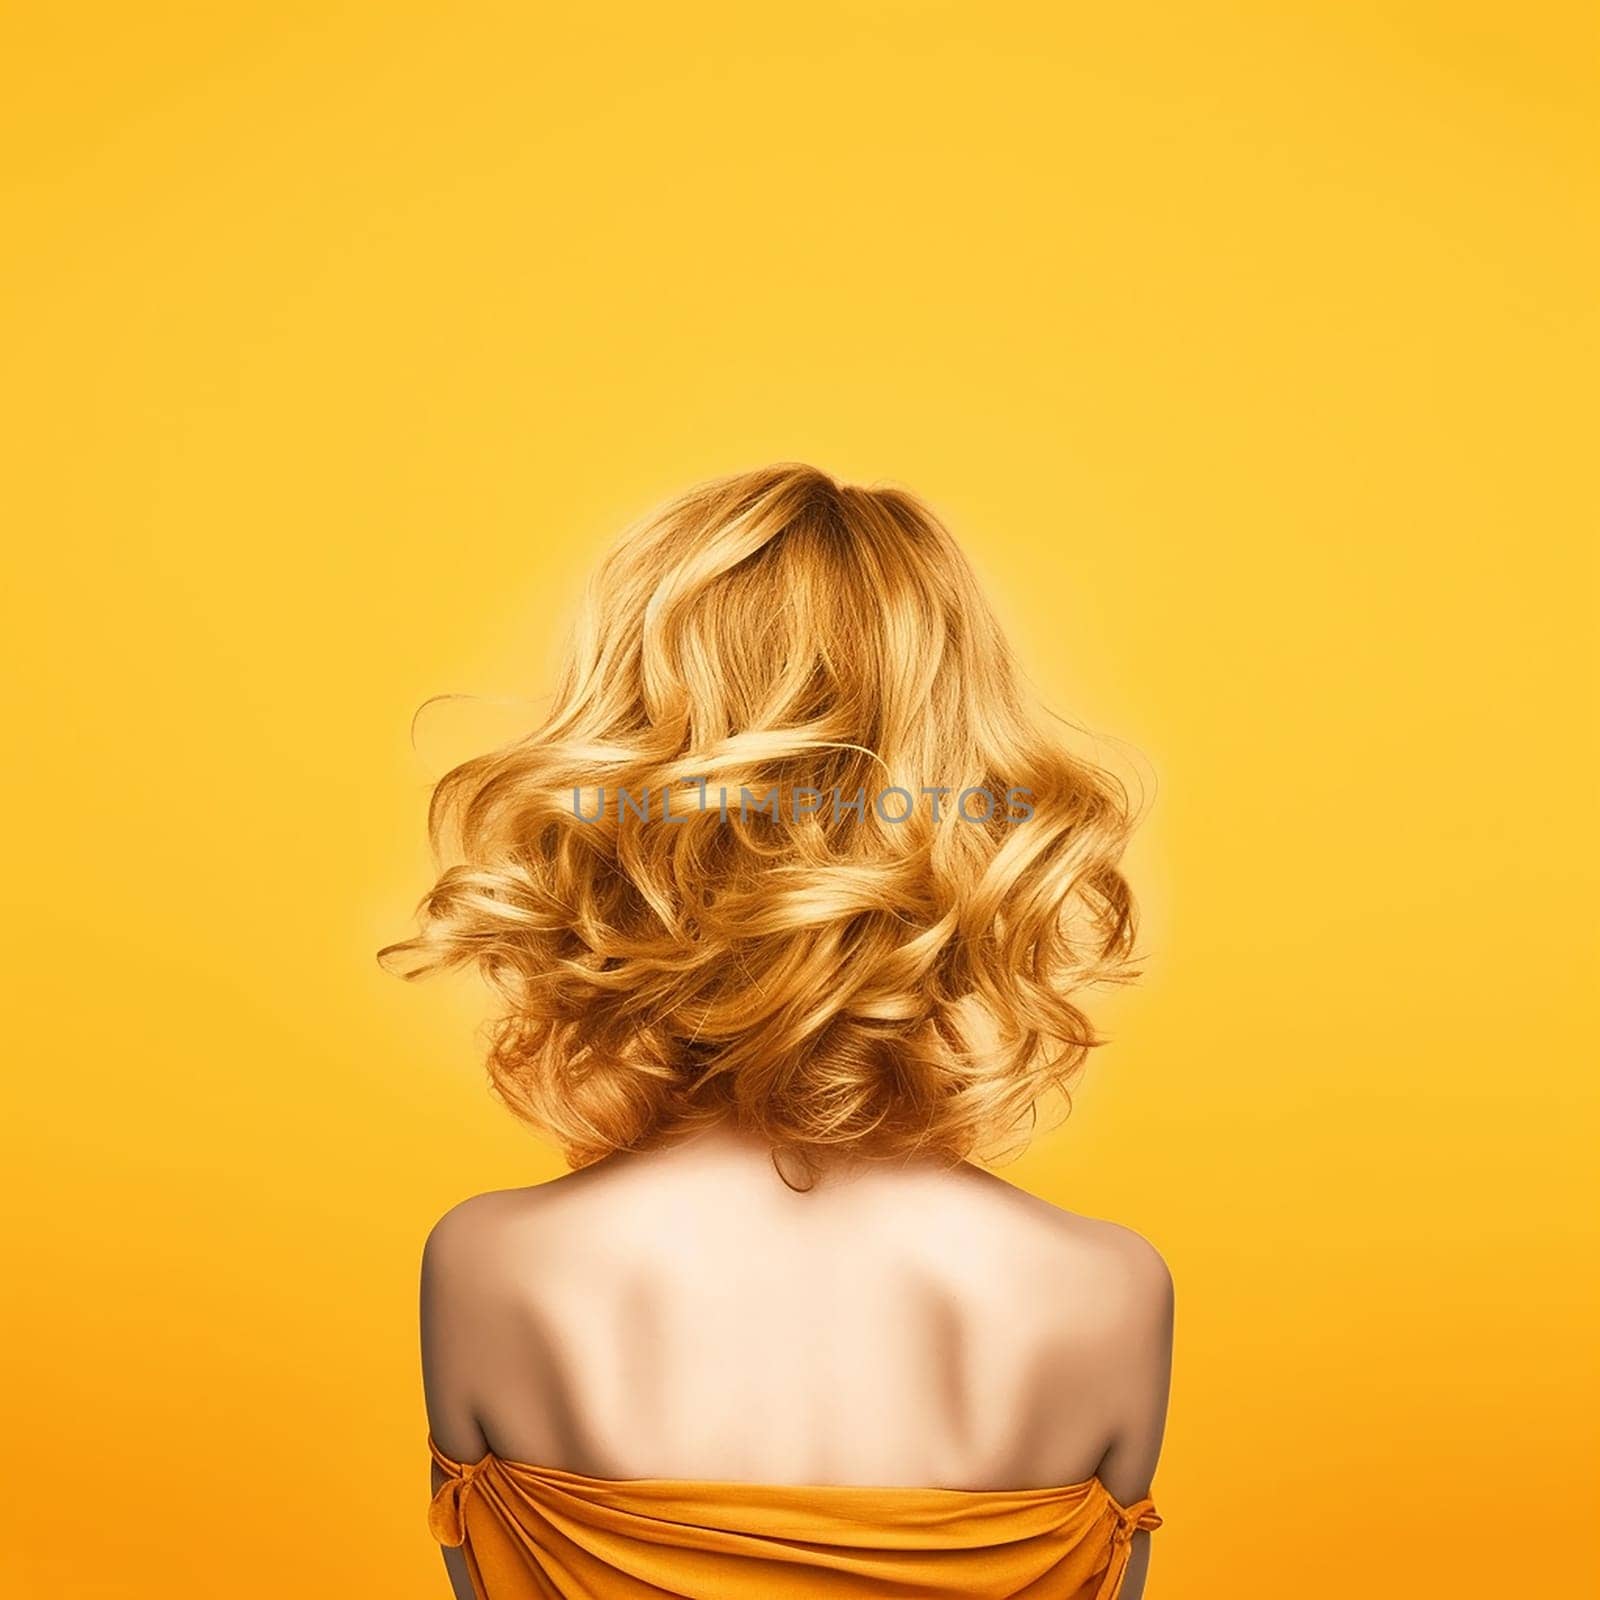 Blond woman with curly hair against a yellow background by Hype2art